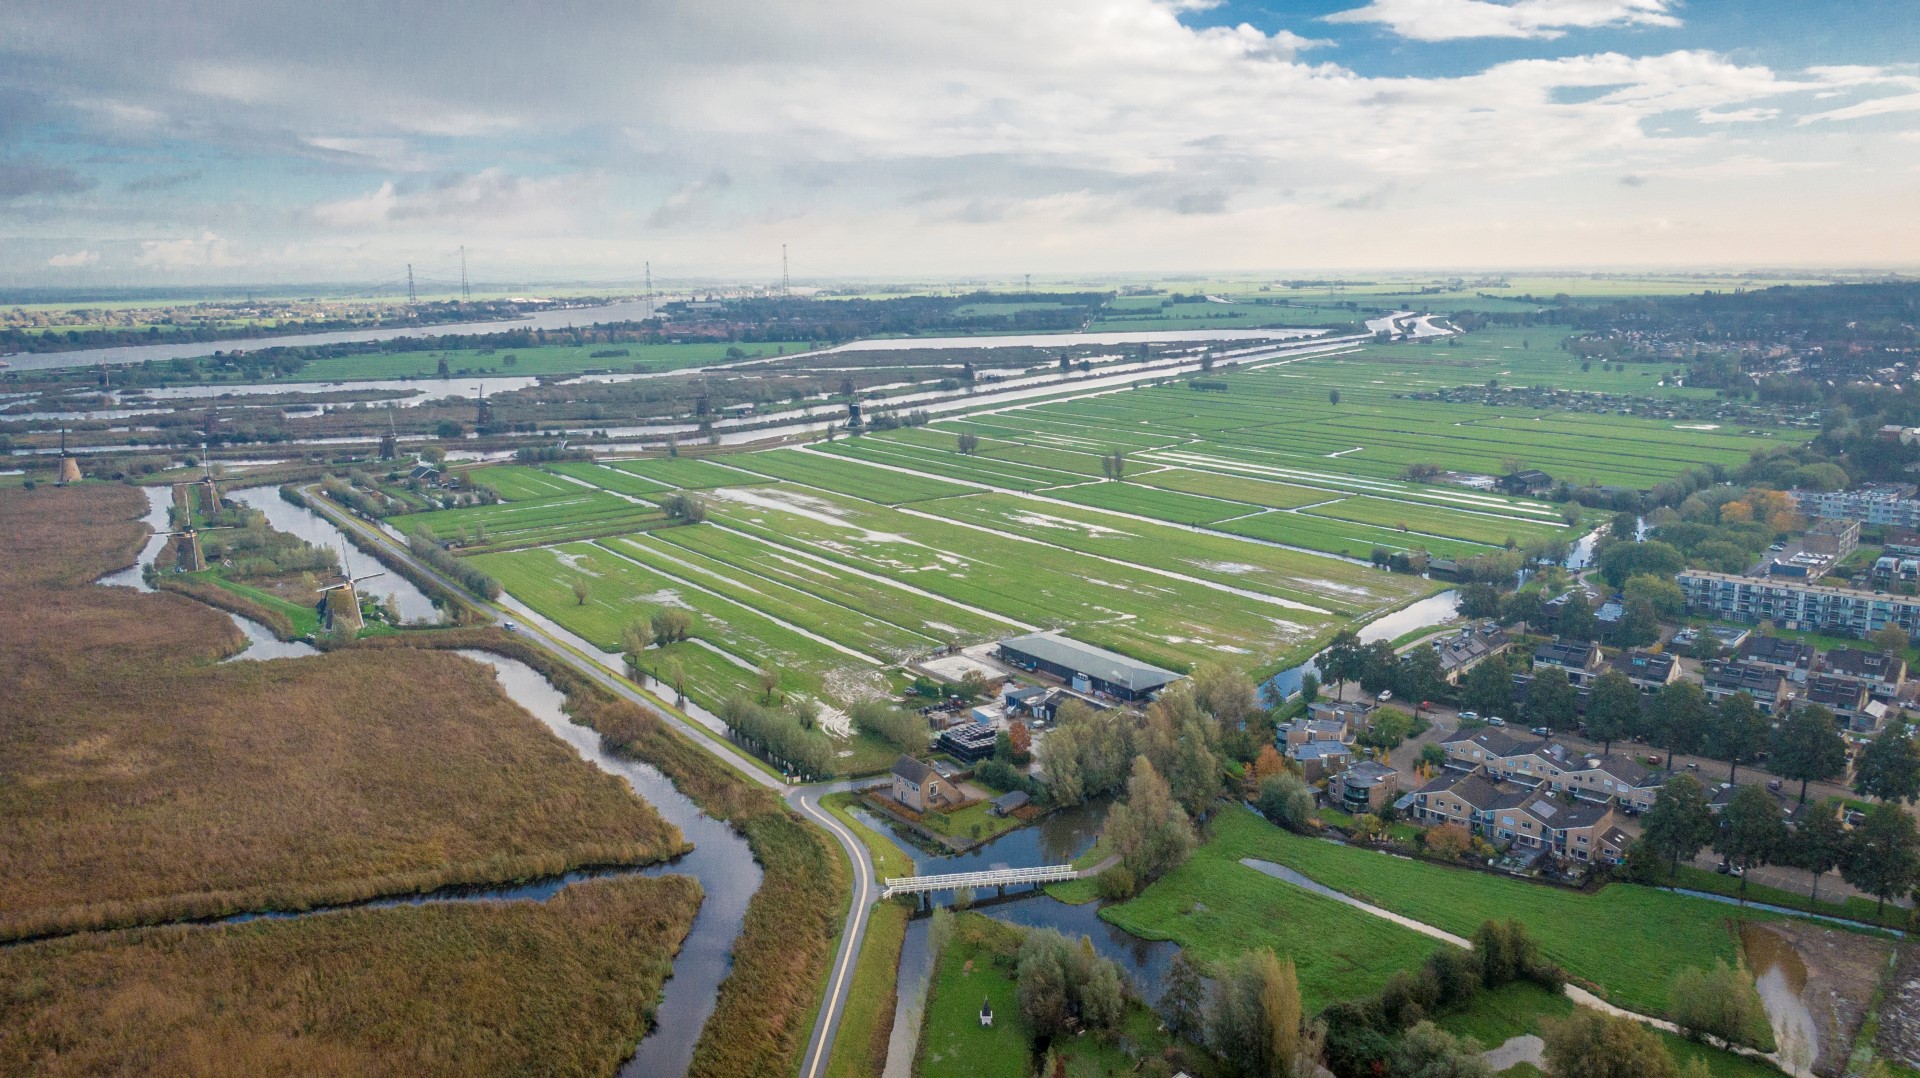 Province buys 125,000 square meters of land in Alblasserdam for ‘nature’